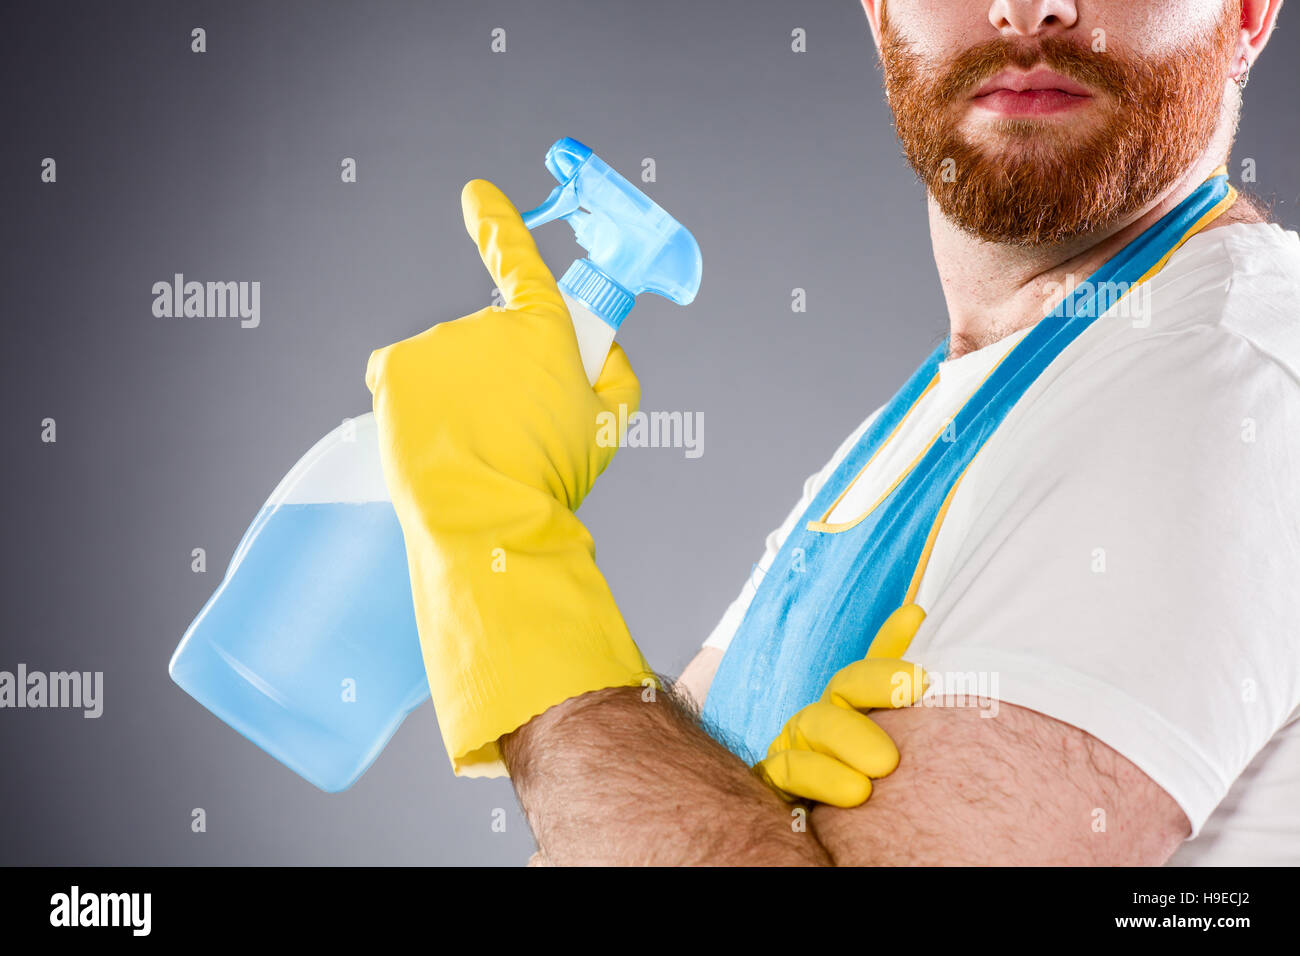 Cleaner Man Holding a Detergent Wearing an Apron and Plastic Gloves Stock Photo